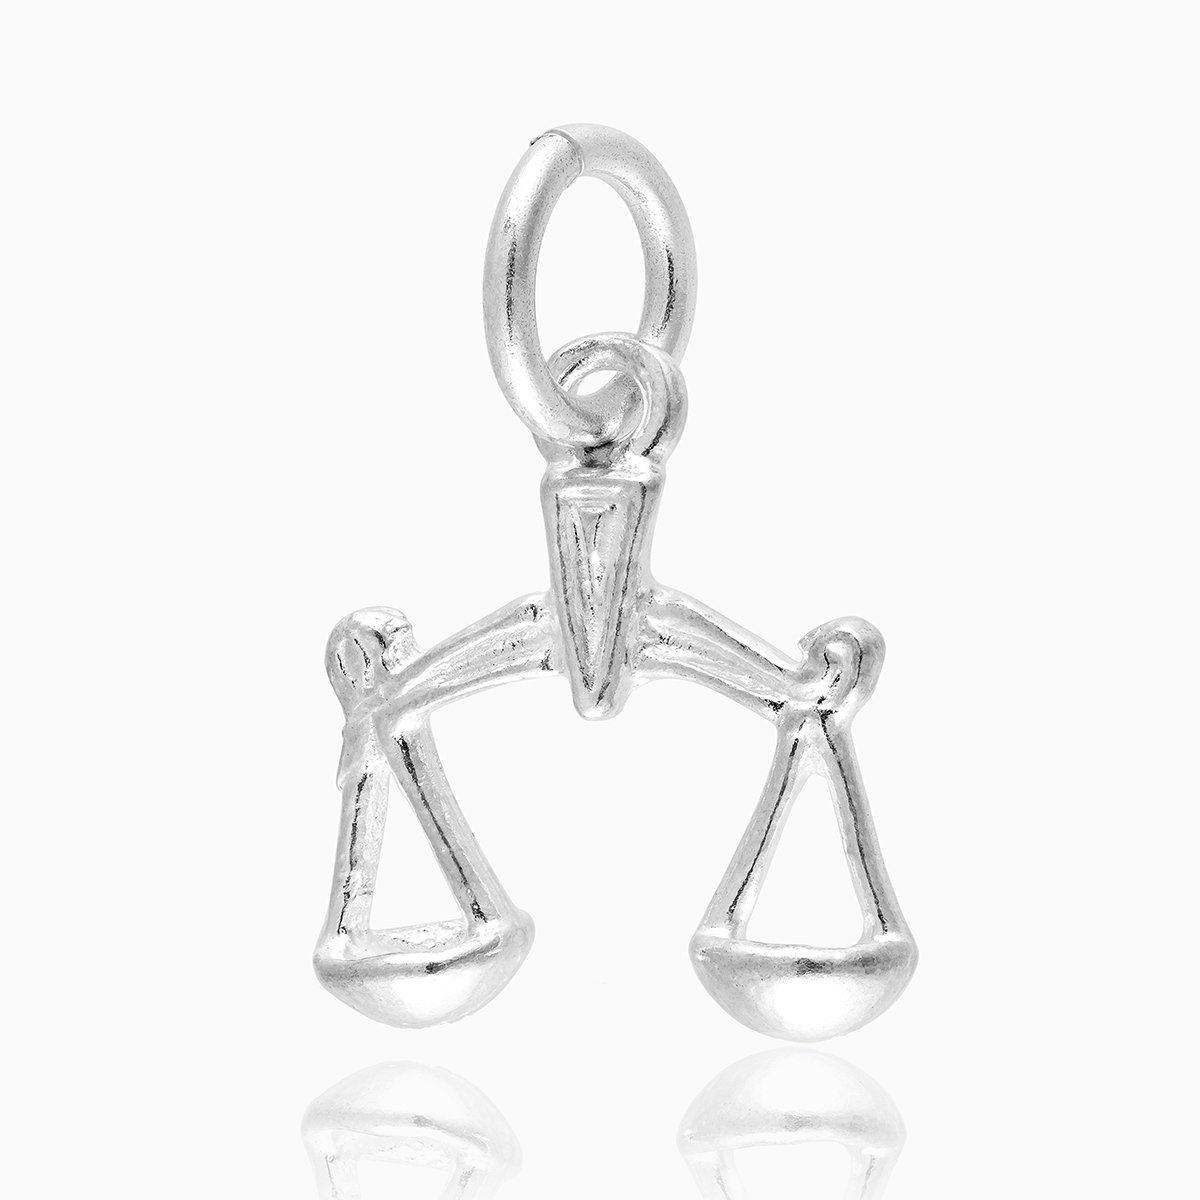 Product title: Libra Silver Charm, product type: Charm